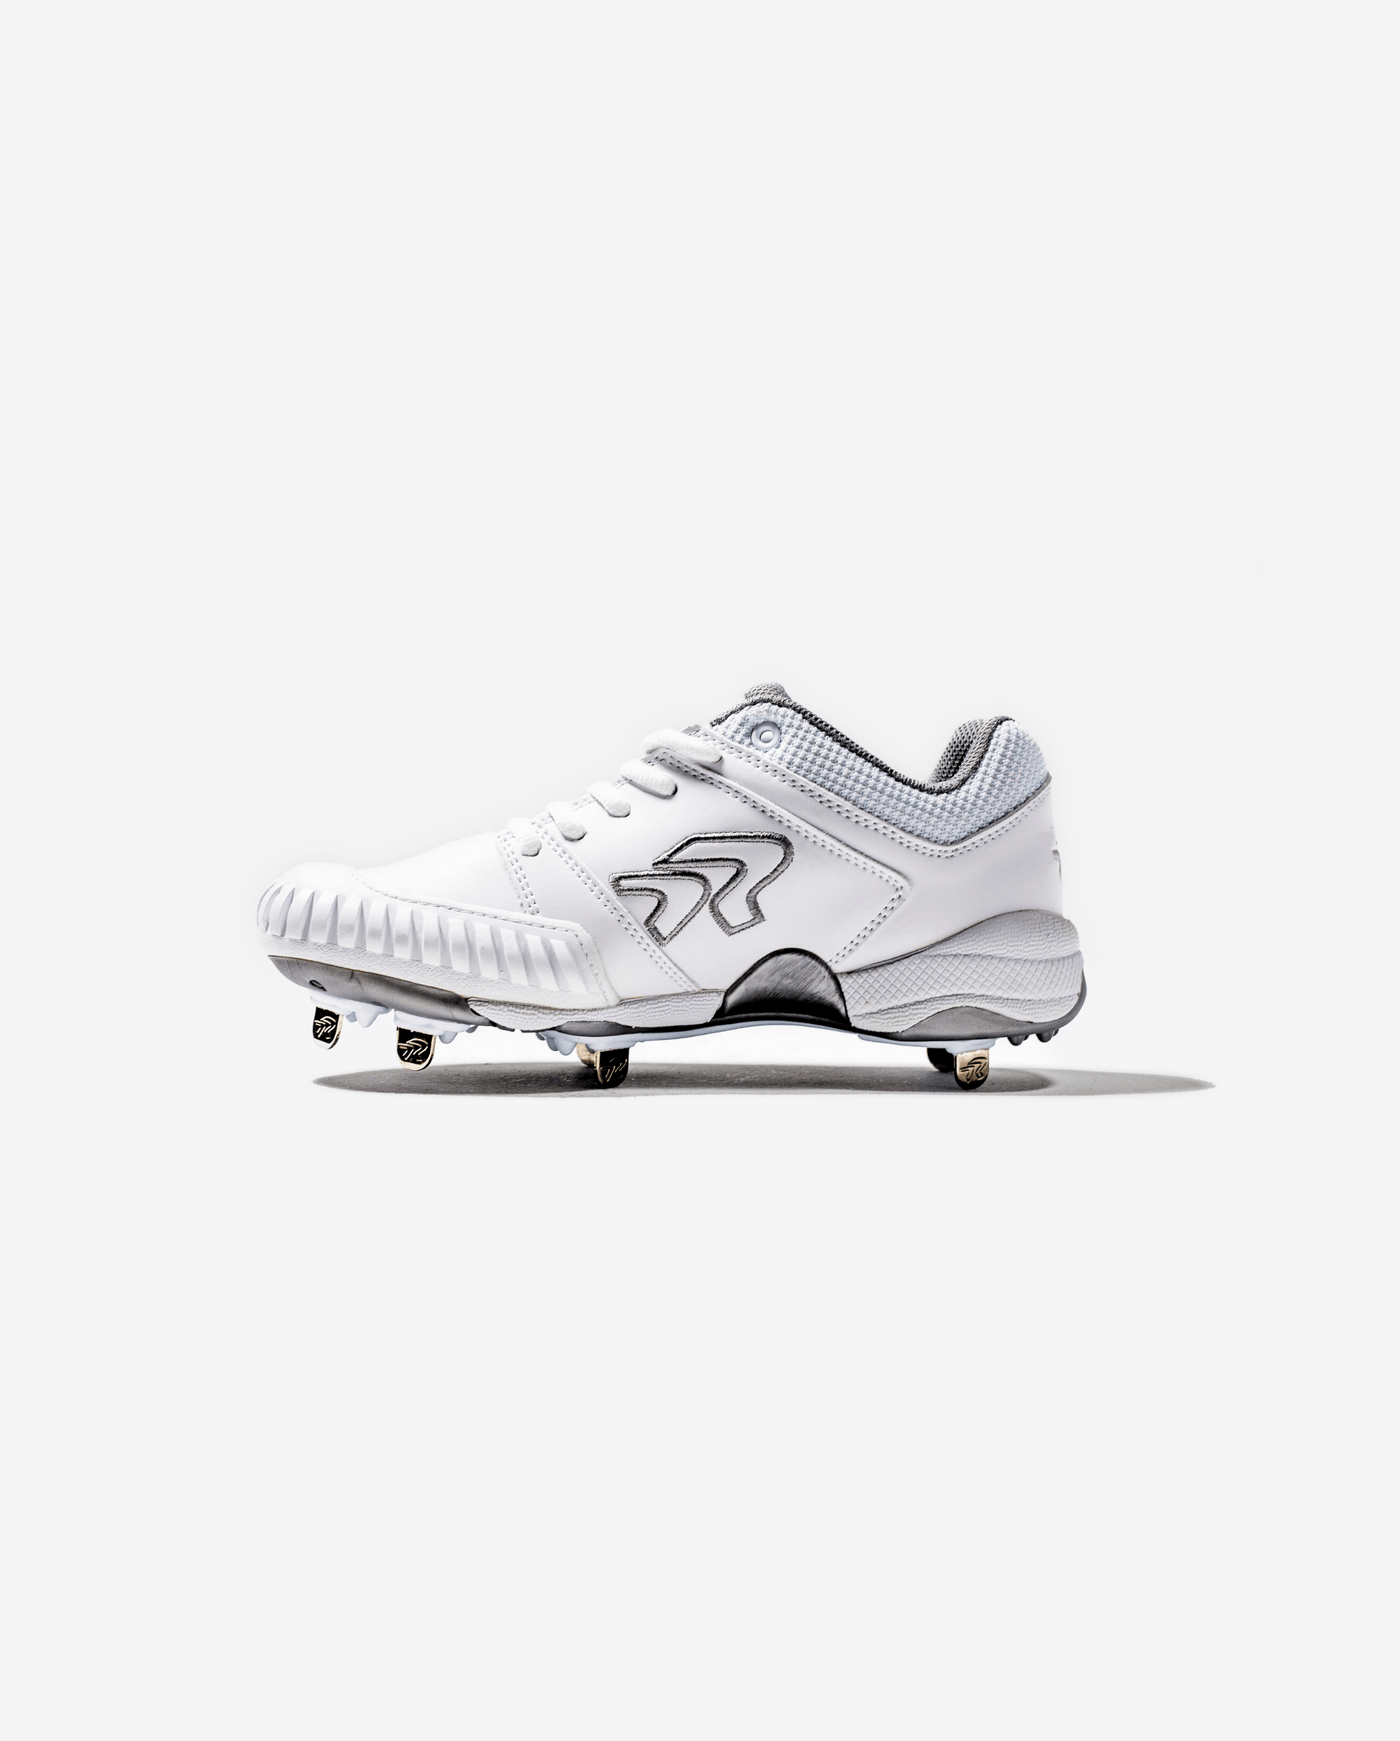 Women's Flite Metal Softball Cleats with Pitching Toe - RIP-IT Sports